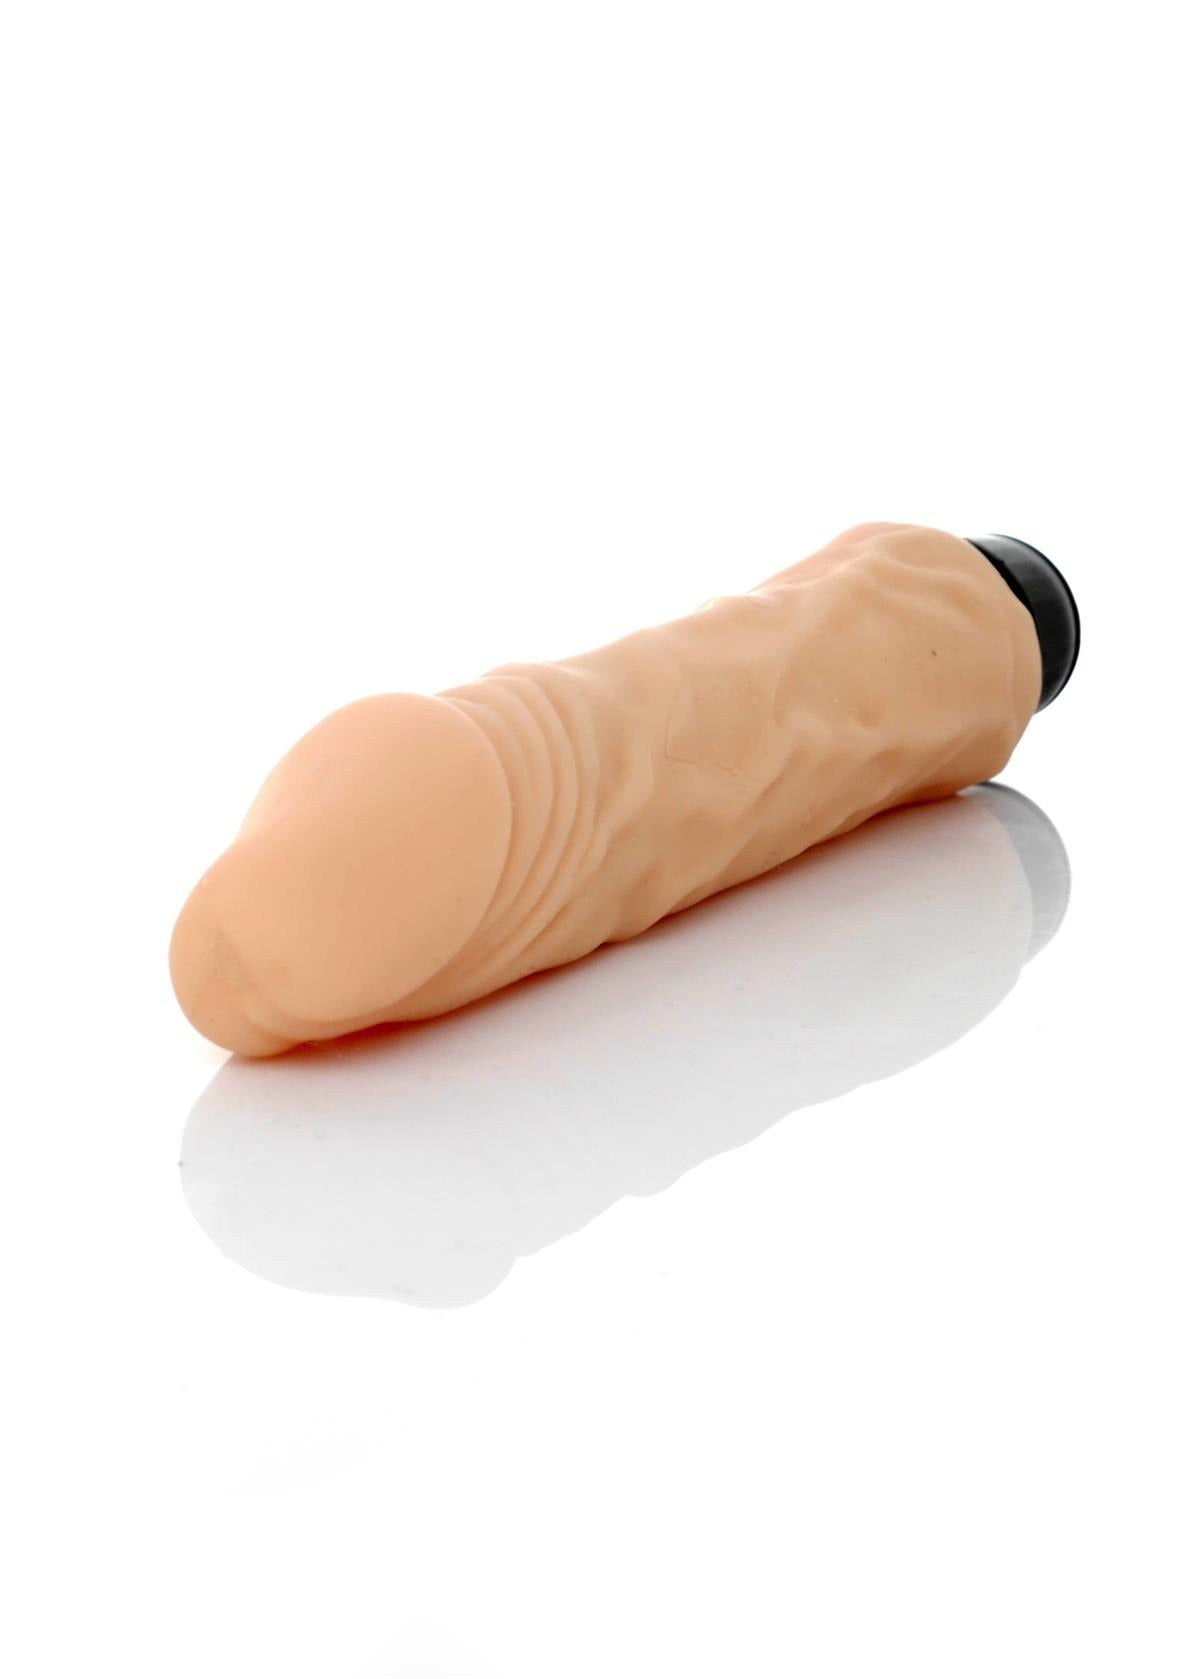 Bossoftoys Sunny Realistic vibrator - 12 function - Cyber leather - Extra ordinary Flexible Material - Flesh - 20,5 cm - 44-00007